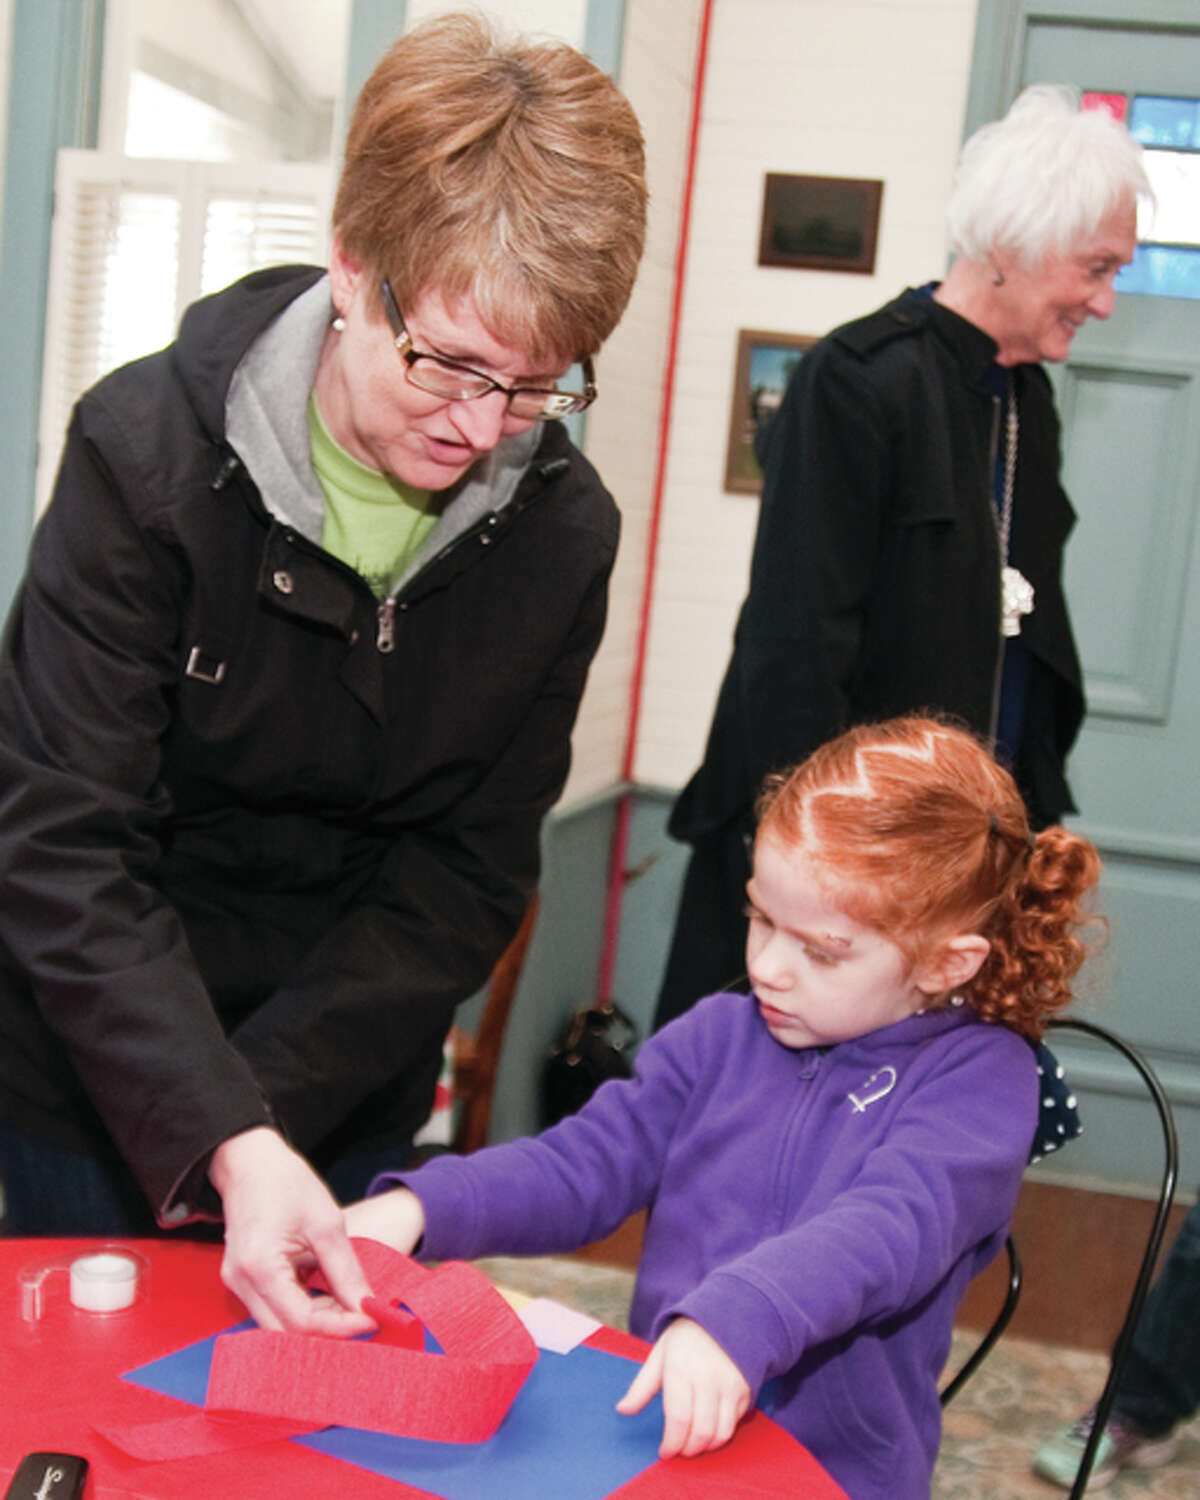 Ann Kuebrich, a member of the Lucy Haskell Playhouse Committee helps 4-year-old Brooke Pals put together a wind sock on Saturday morning inside the Playhouse. Pals and her younger sister Ryleigh came to the playhouse with her grandmother Lynn Sansone all the way from Warren County, Missouri. Sansone said she saw this event listed on Facebook and thought her granddaughters would like taking part in this event.